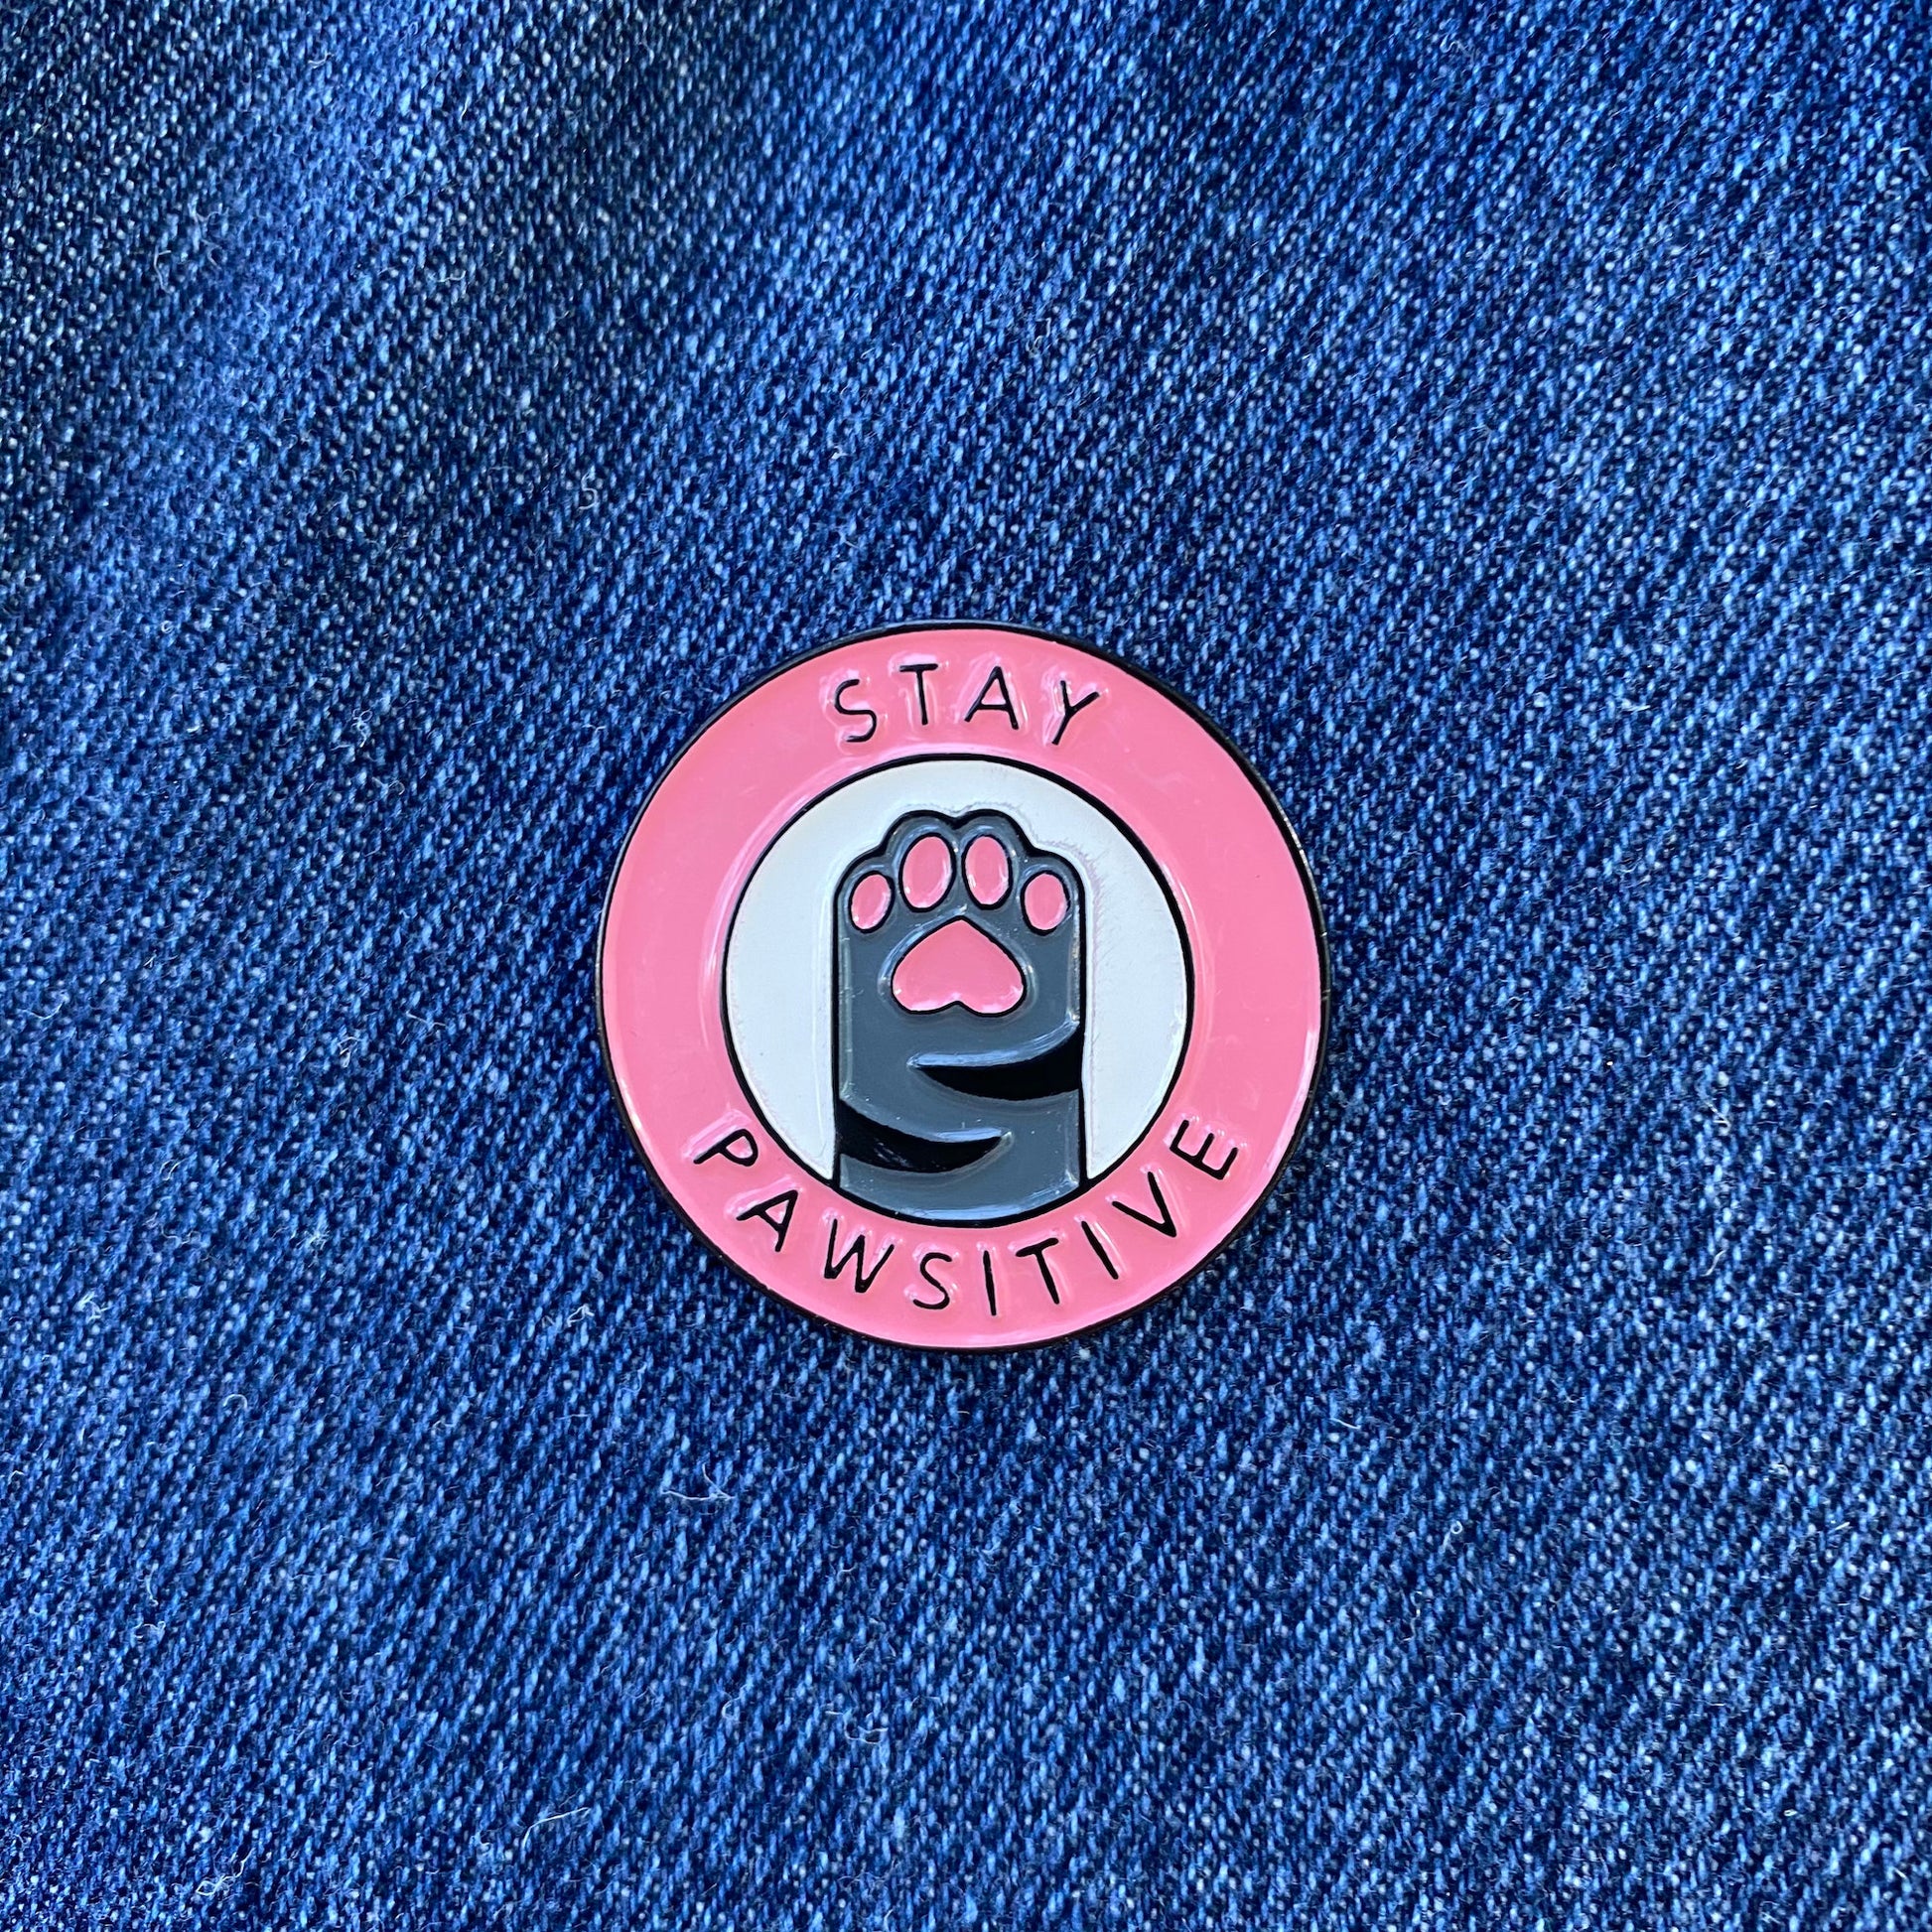 Stay Pawsitive and Be Happy Enamel Pin - thehappypin